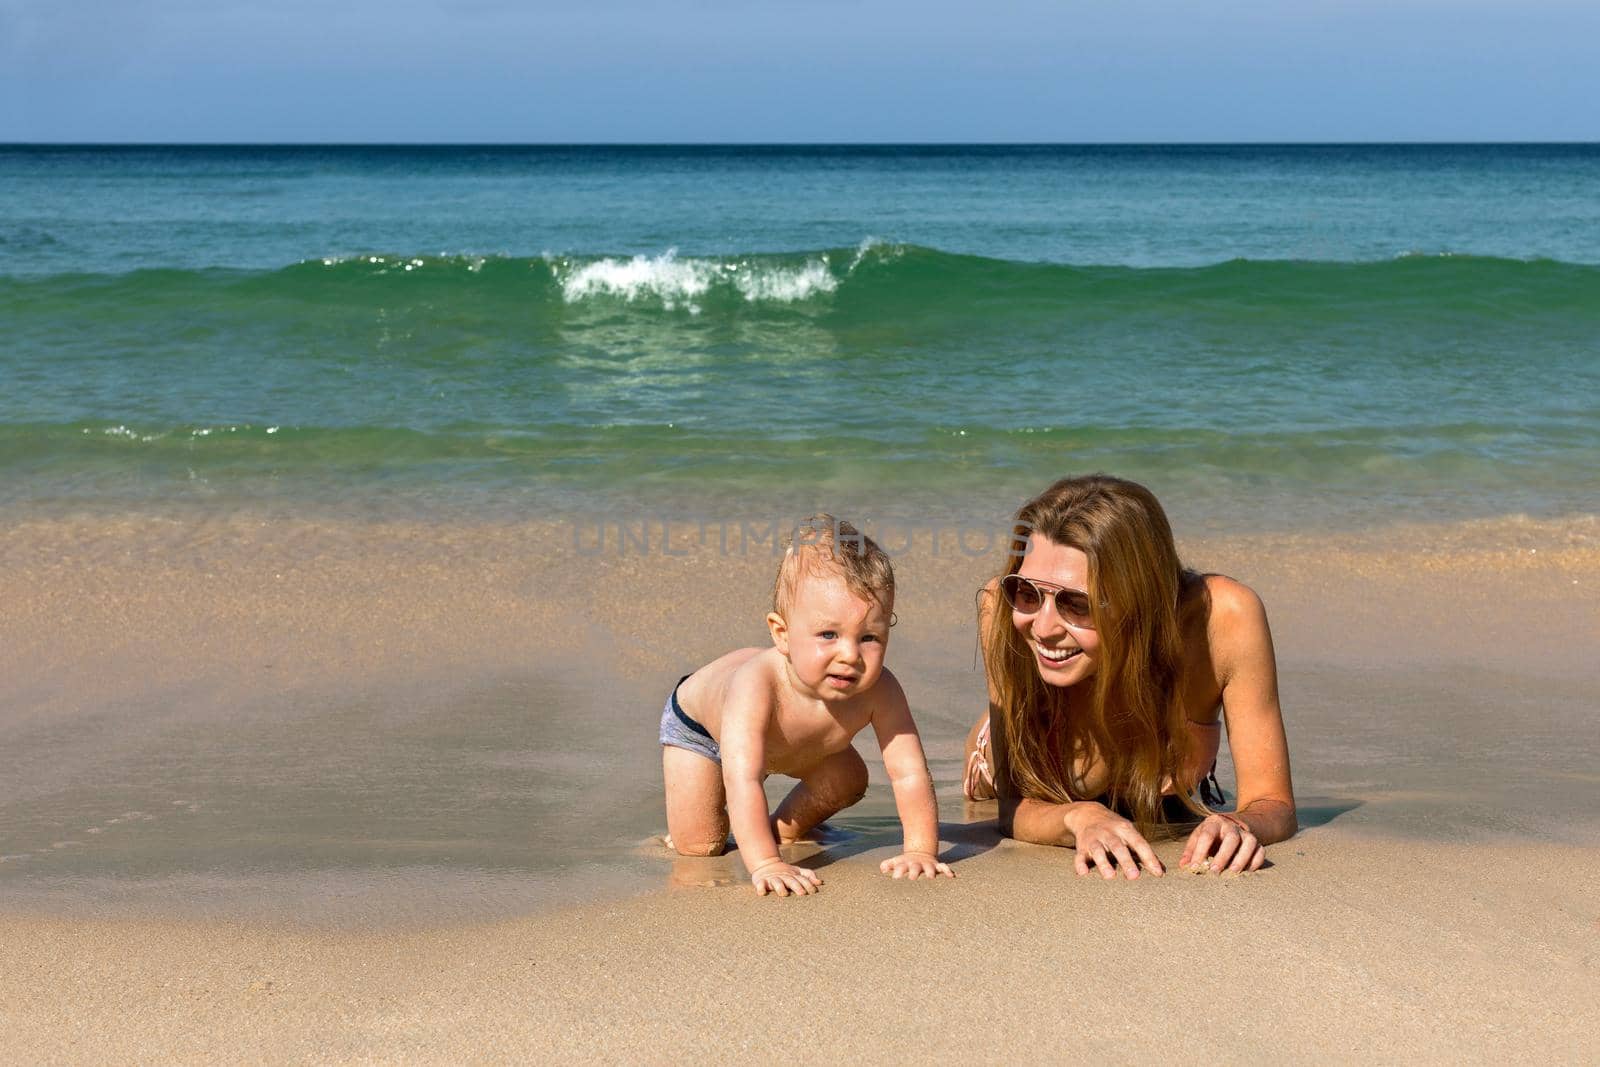 Cheerful young woman in bikini and sunglasses lying with crawling infant baby on sandy beach next to water and enjoying summer day and happy moments together